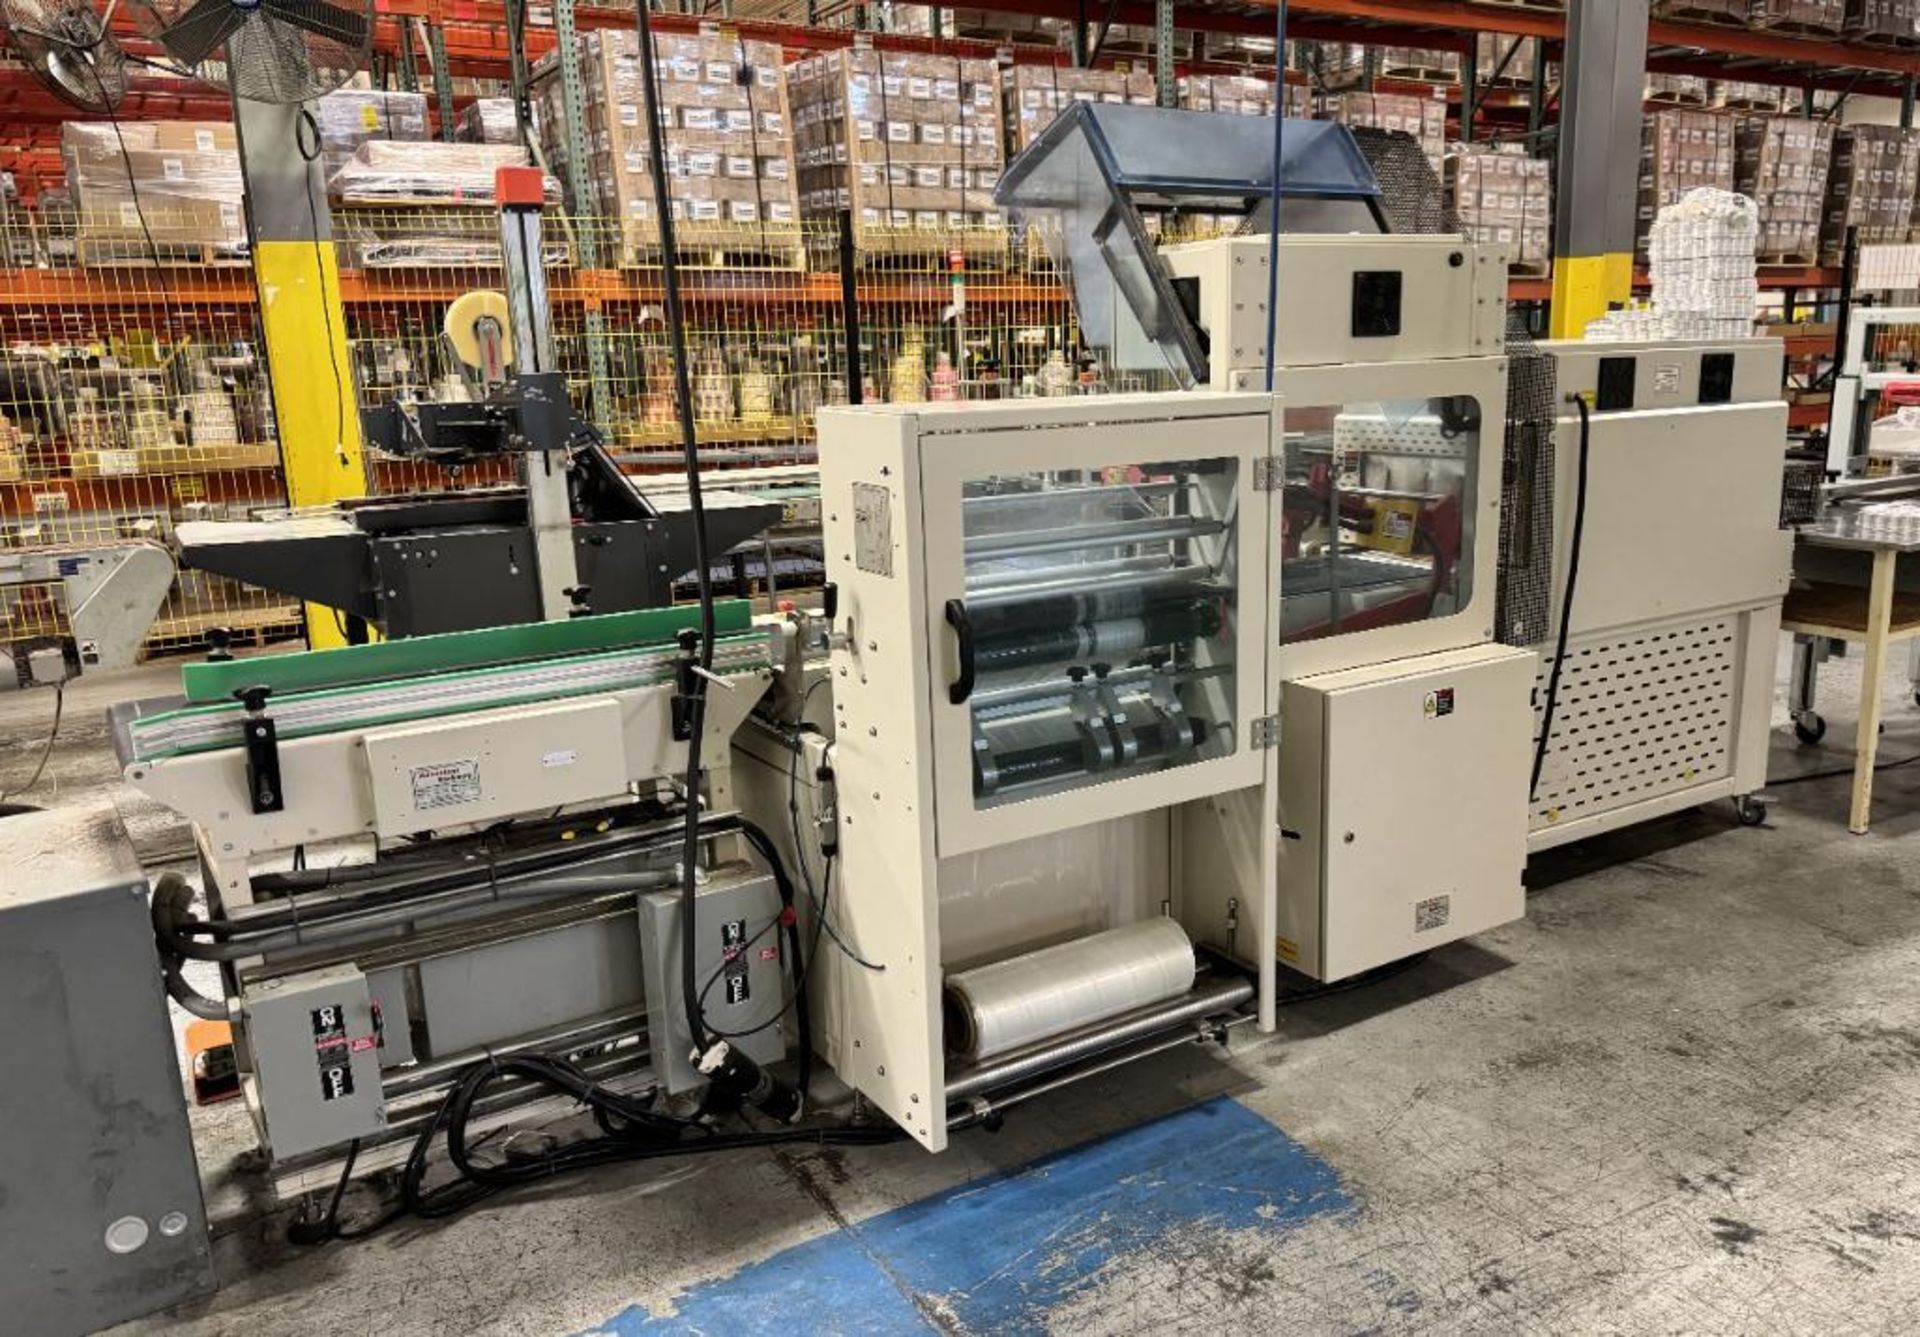 Advantage Machinery L-728 L-Bar Sealing Machine, Serial# 19-001156B, Built 2019. With belted conveyo - Image 4 of 18